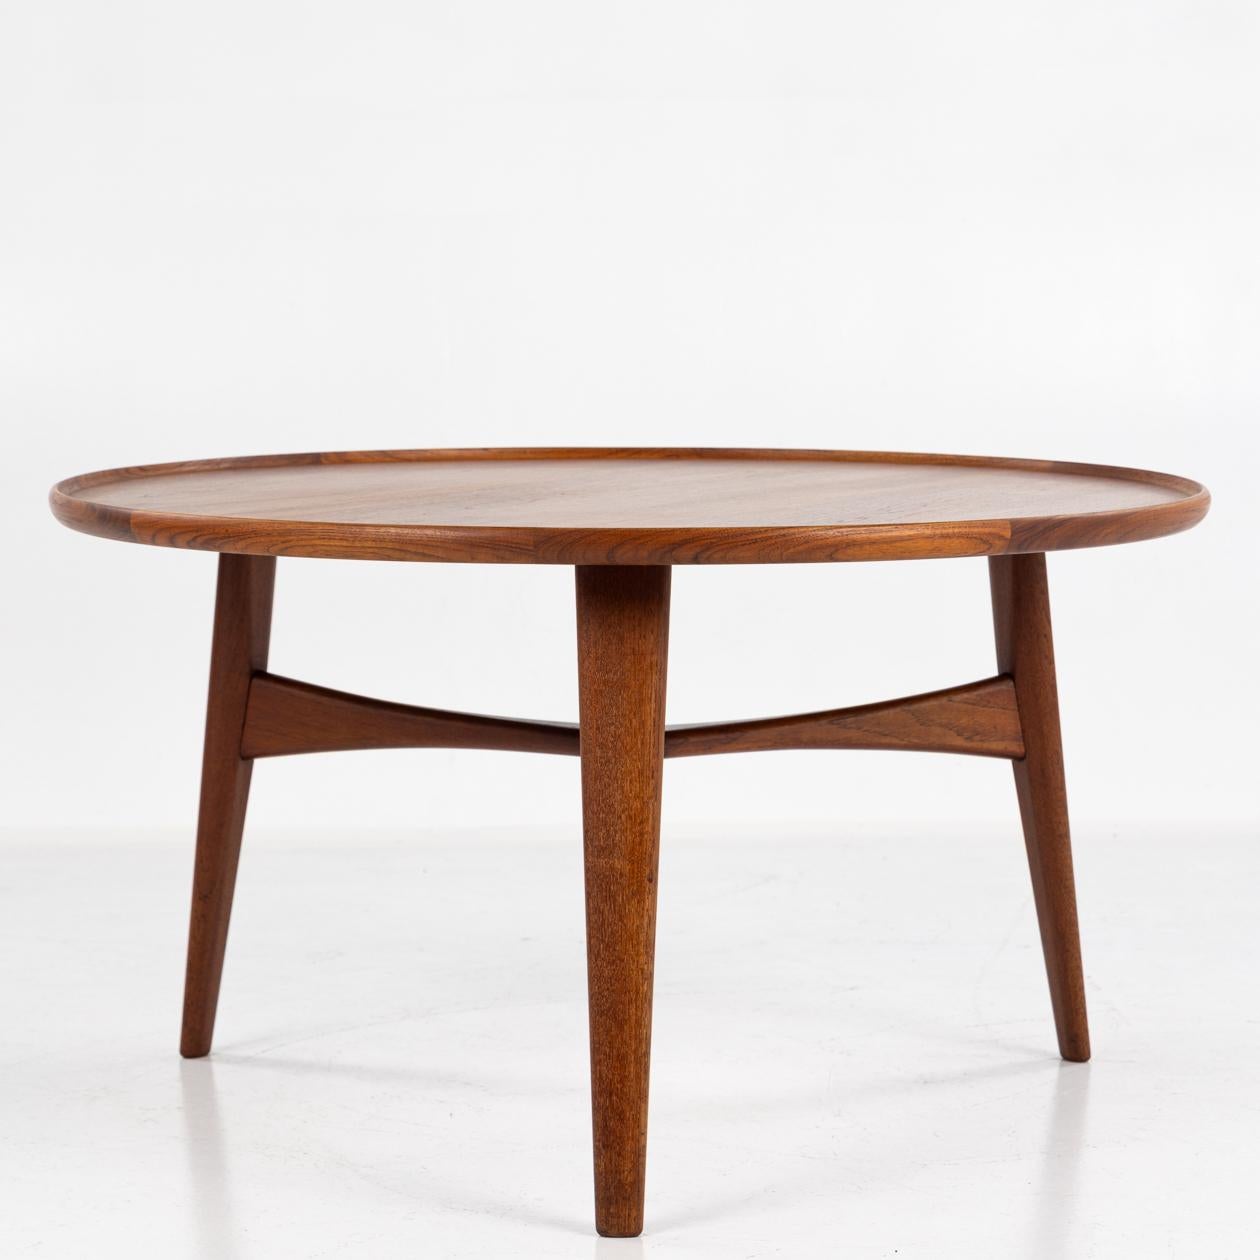 Round coffee table in rosewood with a beveled edge and V-shaped legs. Designed by Aksel Bender Madsen & Ejnar Larsen for master cabinetmaker Willy Beck. 